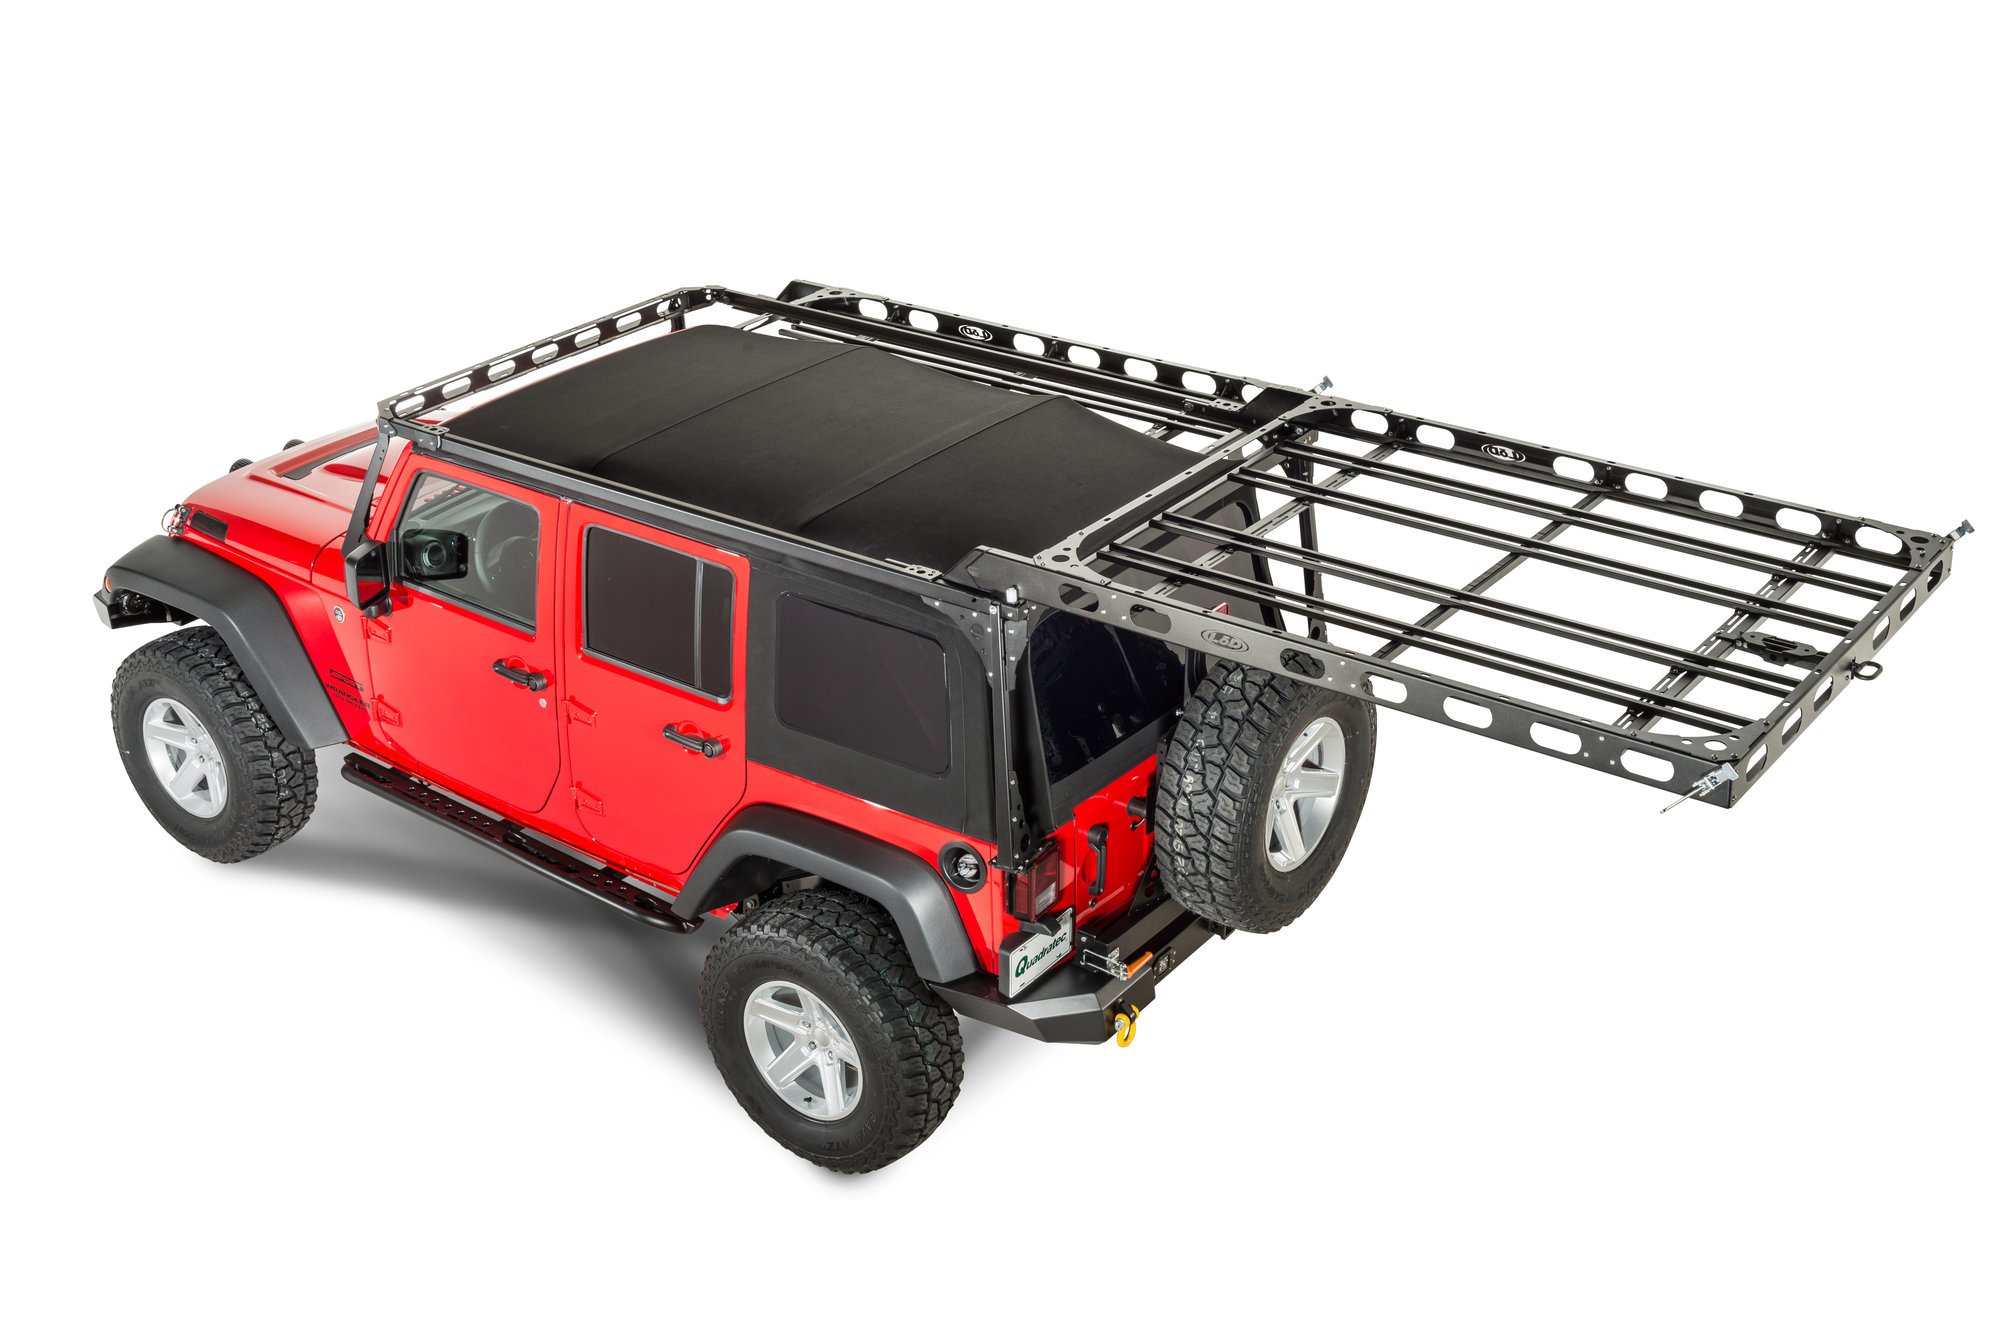 Lod Easy Access Roof Rack System For 07 18 Jeep Wrangler Unlimited Jk